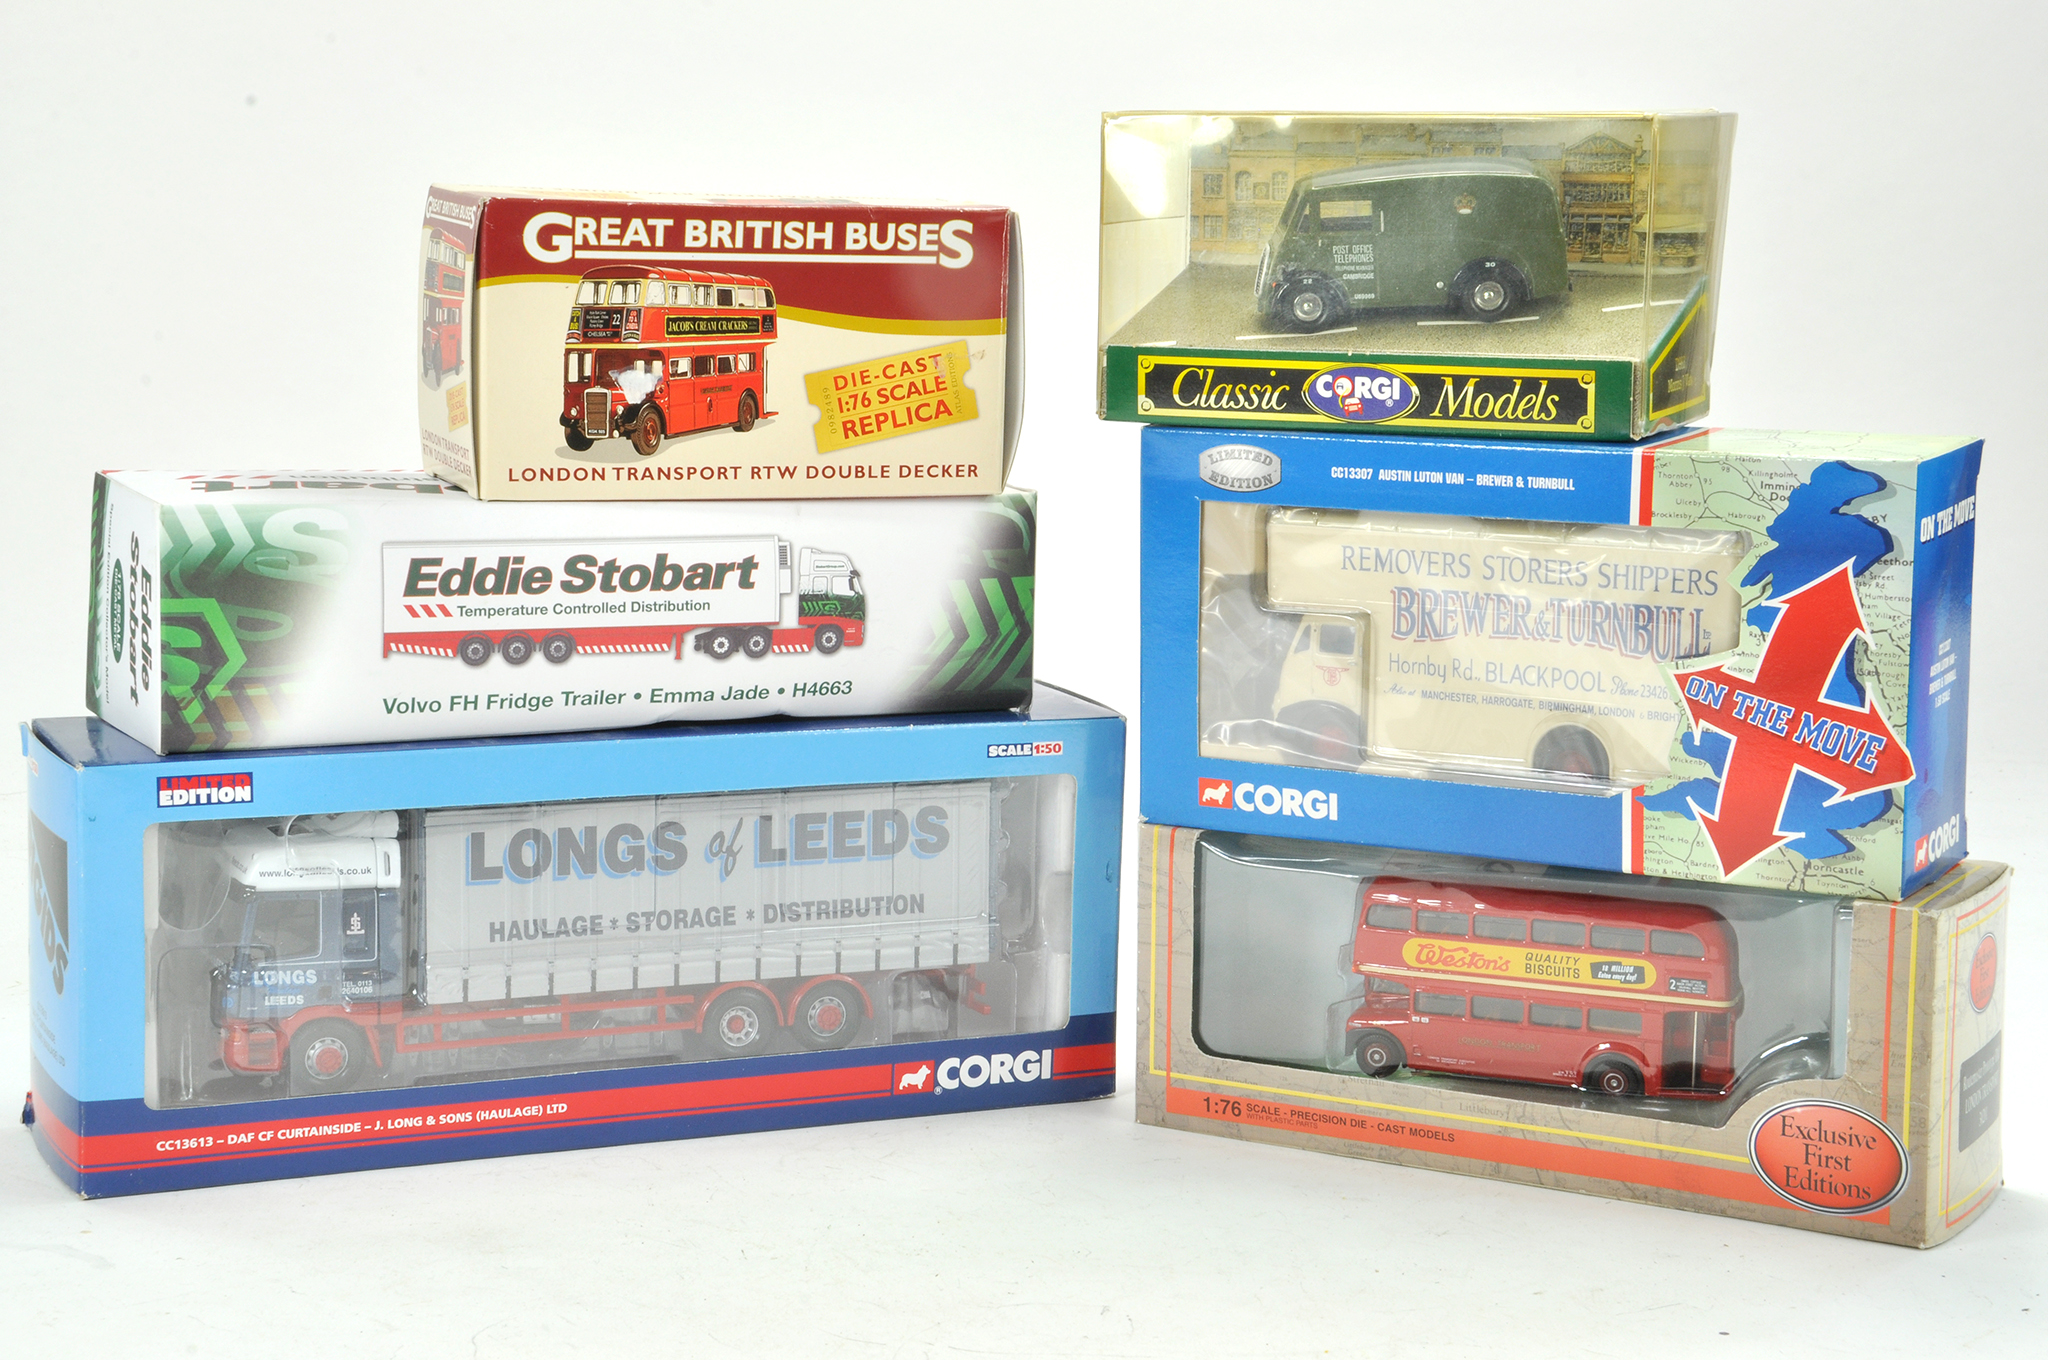 Corgi Commercial Truck issue comprising No. CC13613 DAF Curtainside in the livery of Long and Sons